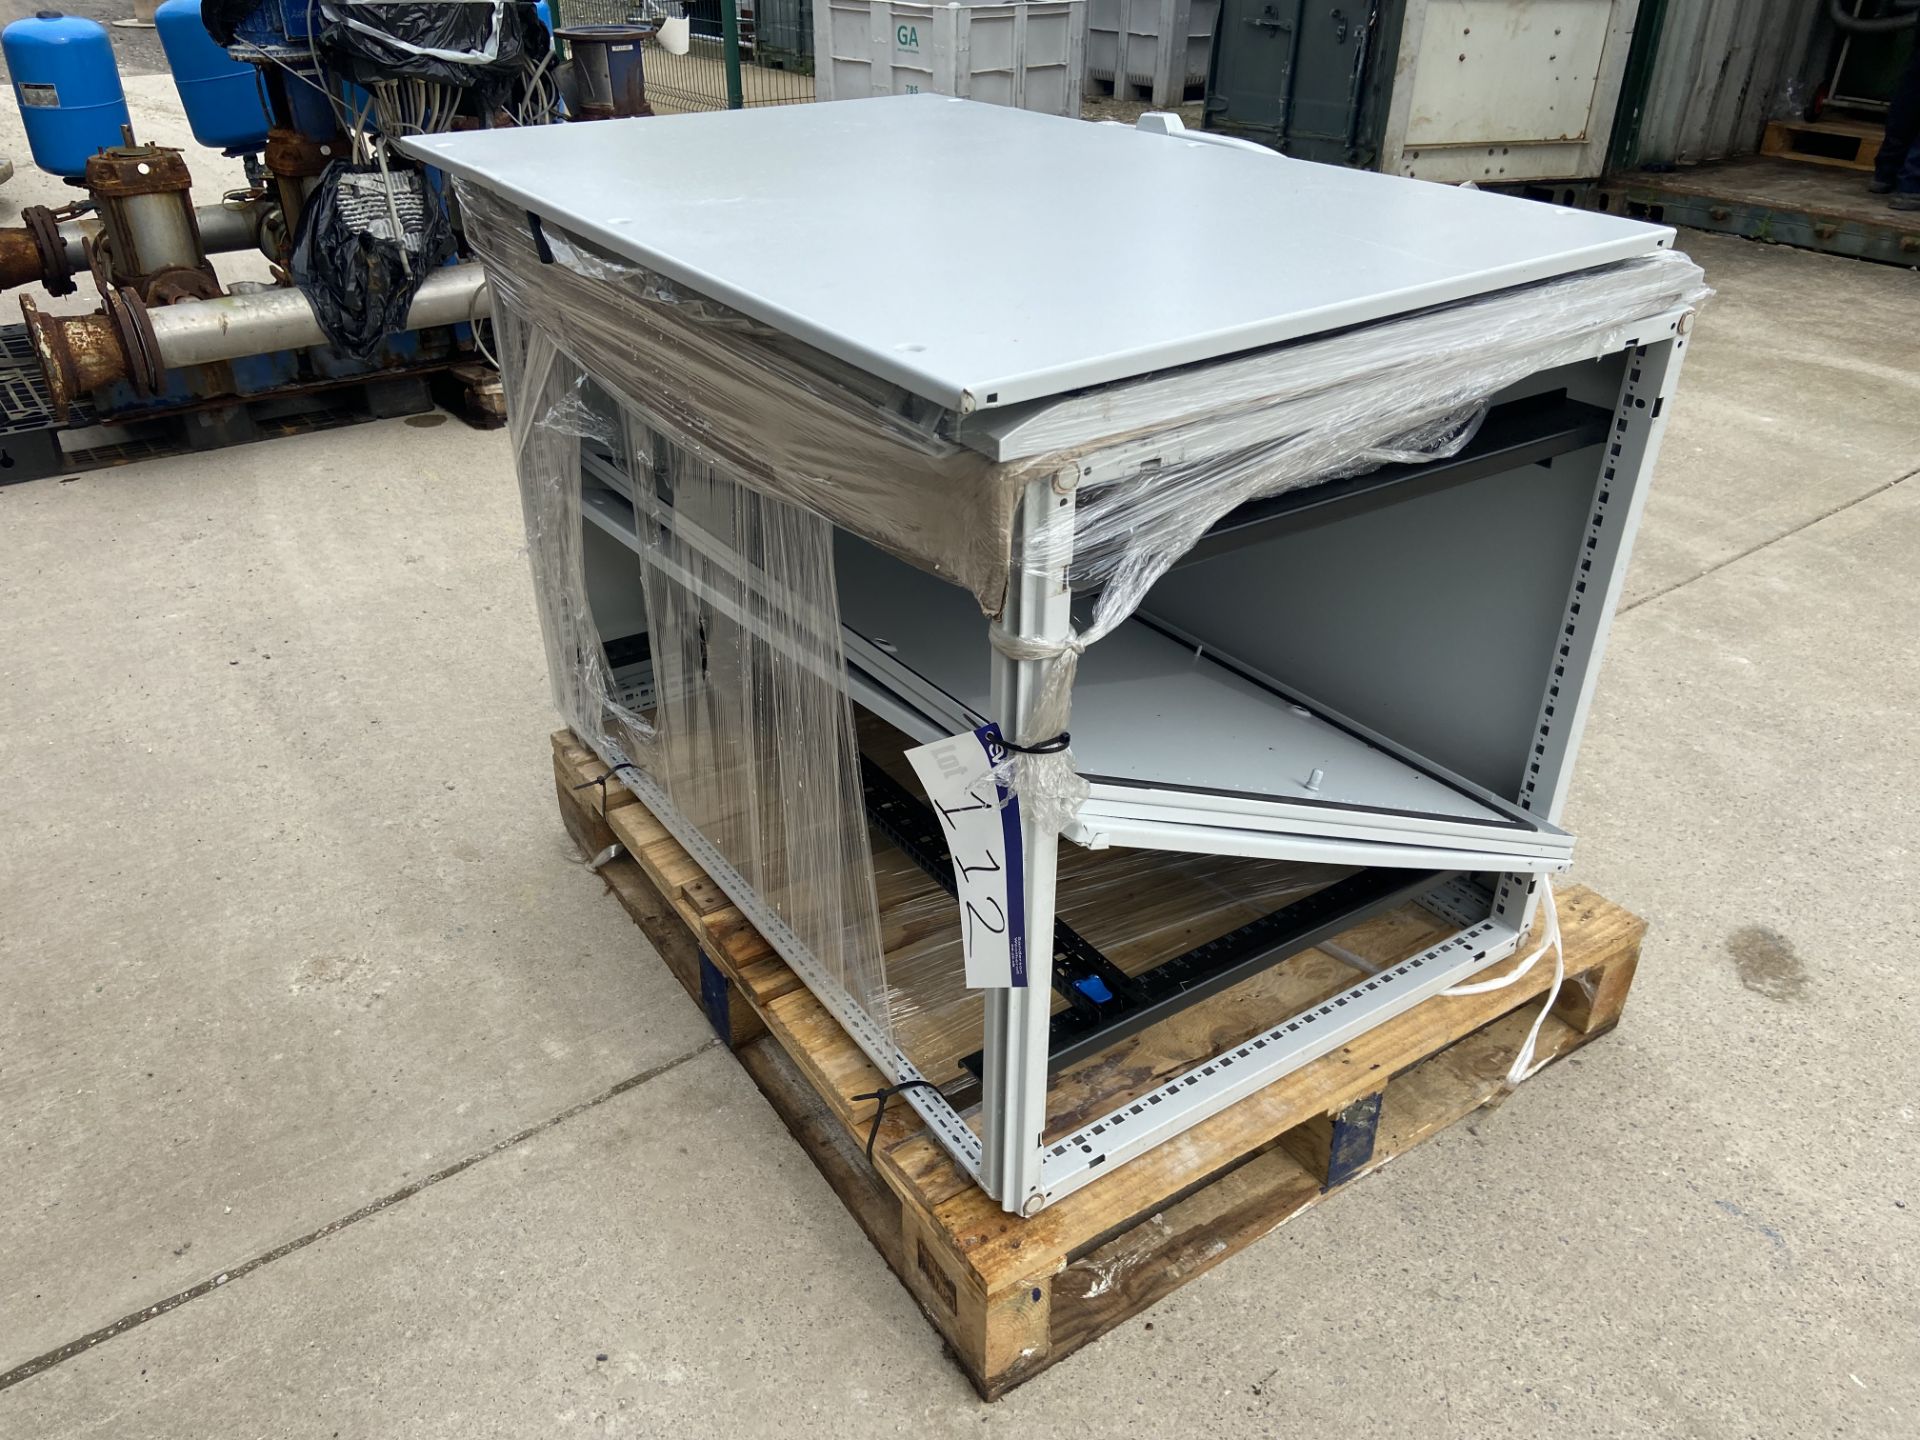 Rittal Server Cabinet (no key) , lot located in Bretherton, Lancashire, lot loaded free of charge - Image 3 of 3